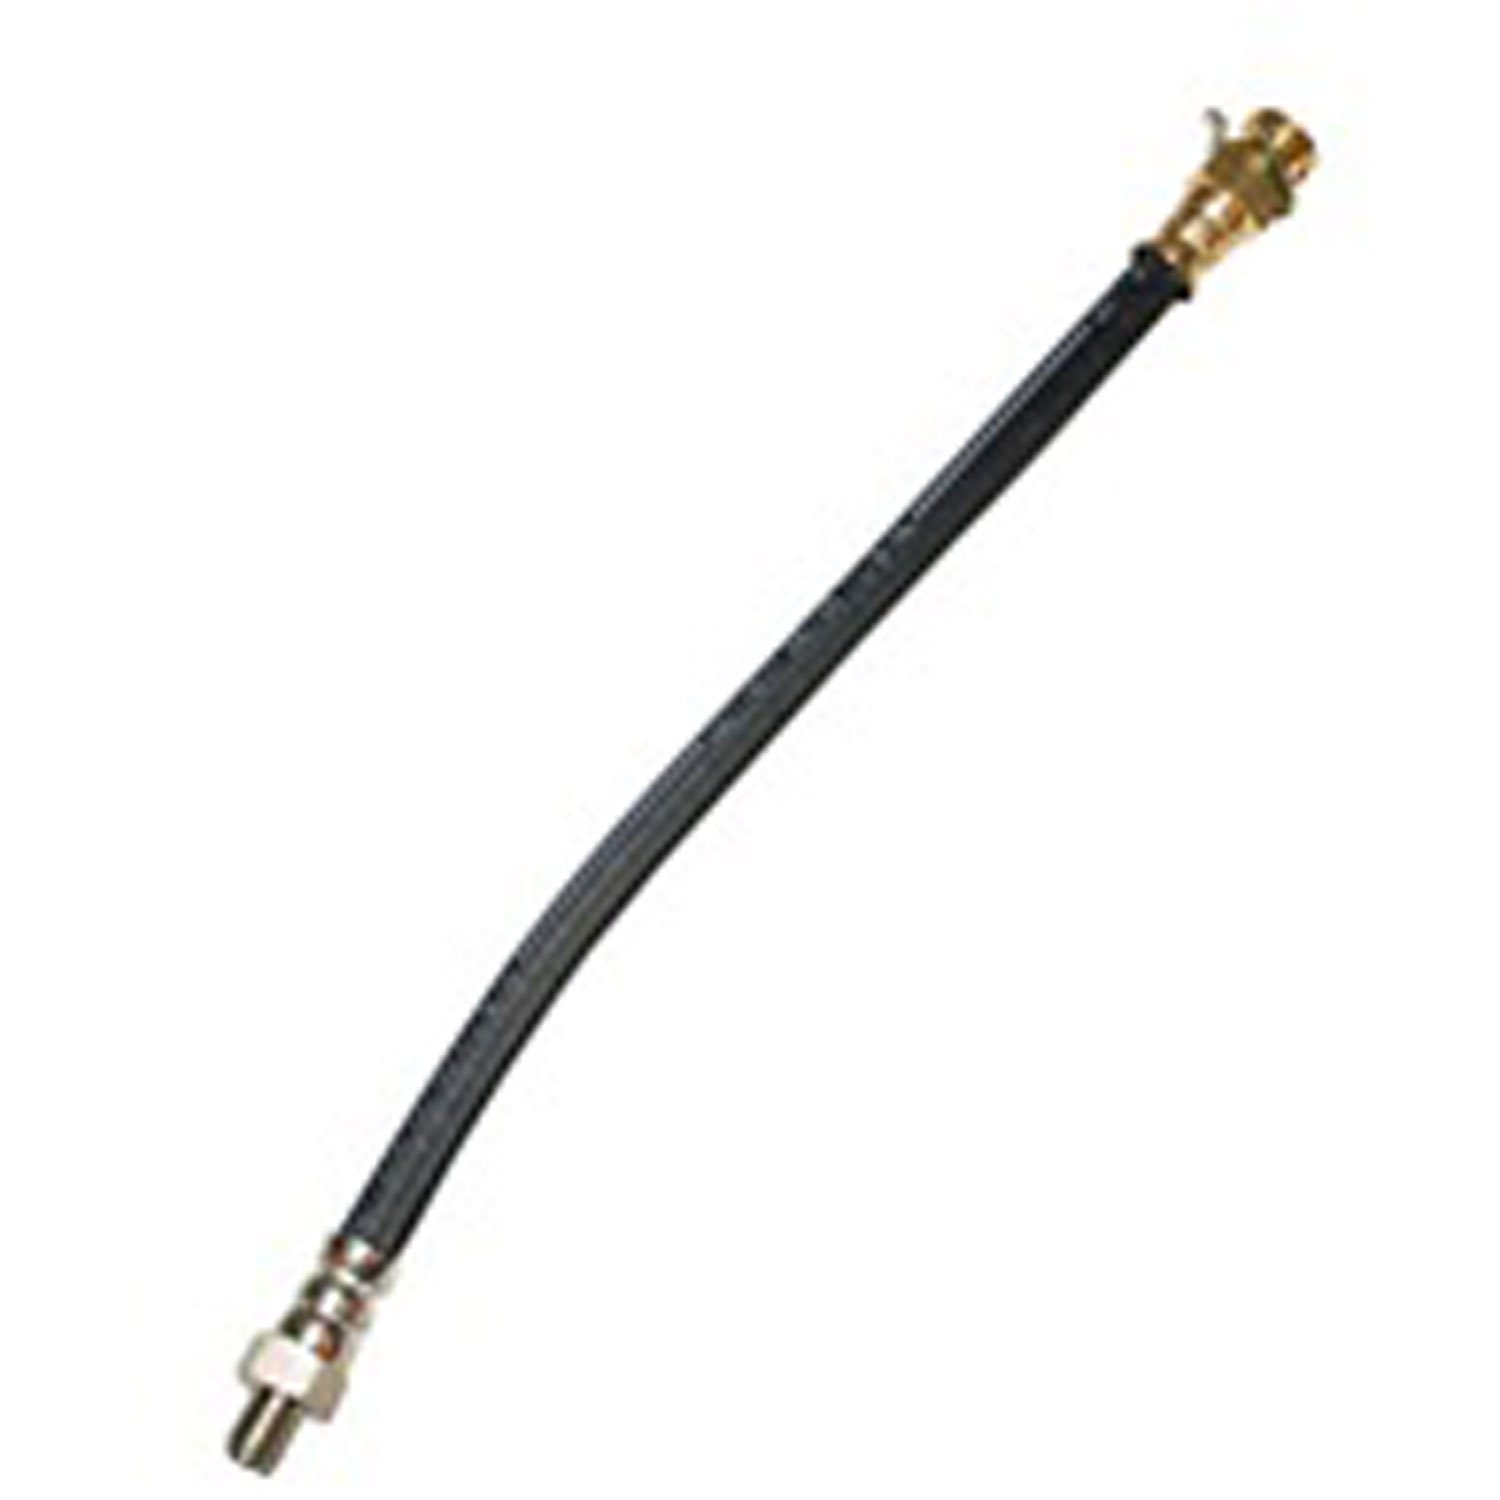 This flexible 12 1/4 inch front brake hose from Omix-ADA fits 41-45 Willys MB Ford GPW and 46-66 Willys CJ models.